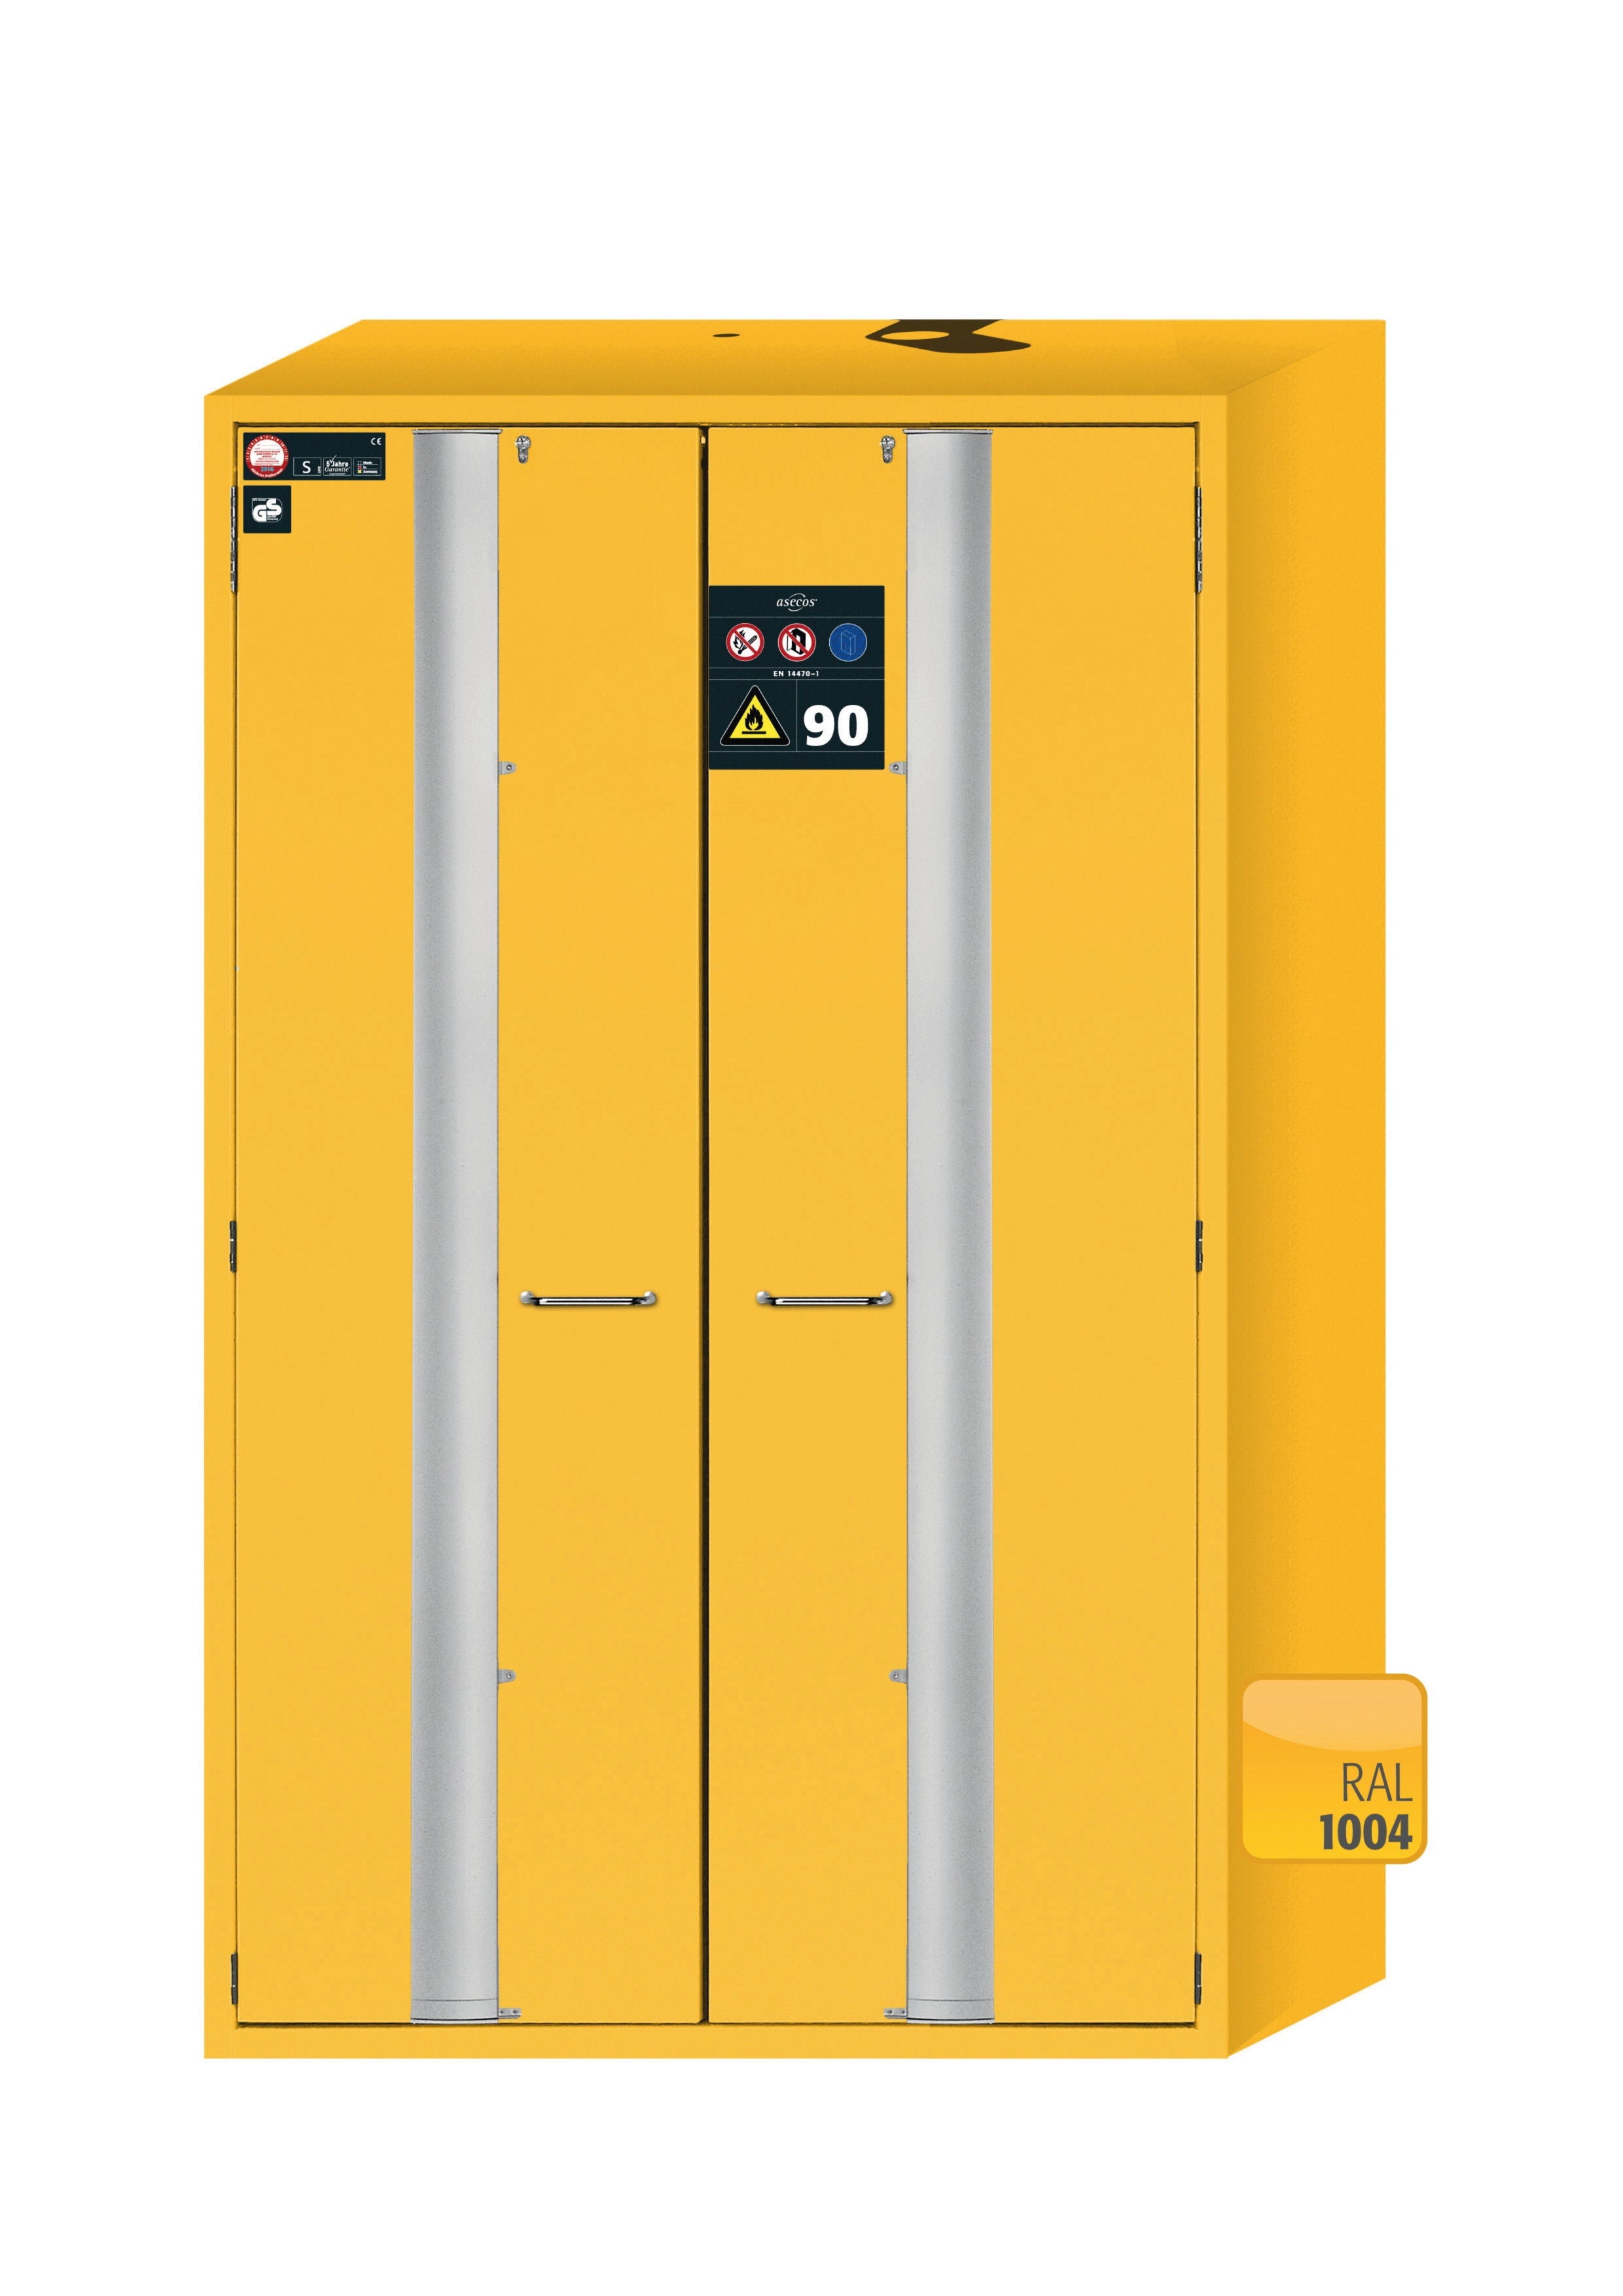 Type 90 safety storage cabinet S-PHOENIX-90 model S90.196.120.FDAS in warning yellow RAL 1004 with 3x drawer (standard) (stainless steel 1.4301),